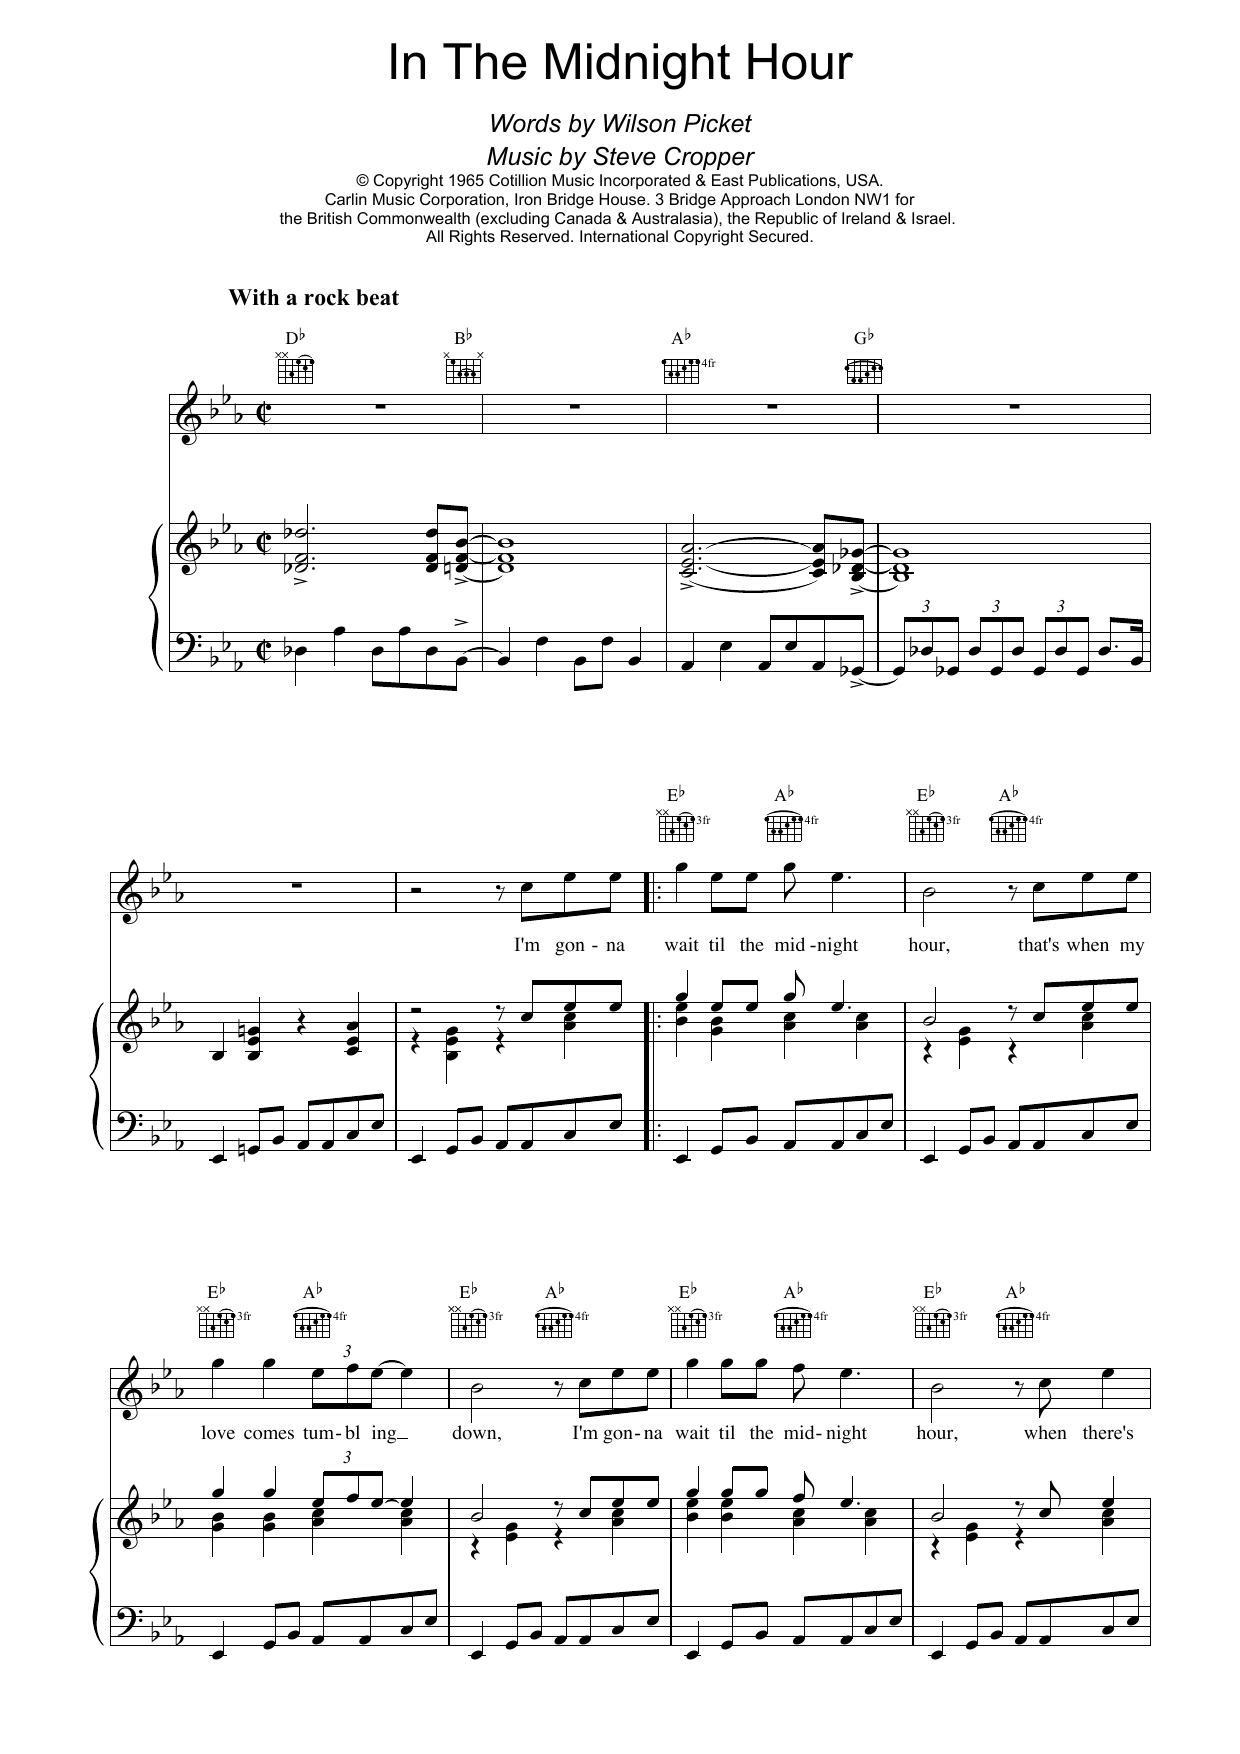 Wilson Pickett In The Midnight Hour sheet music notes and chords. Download Printable PDF.